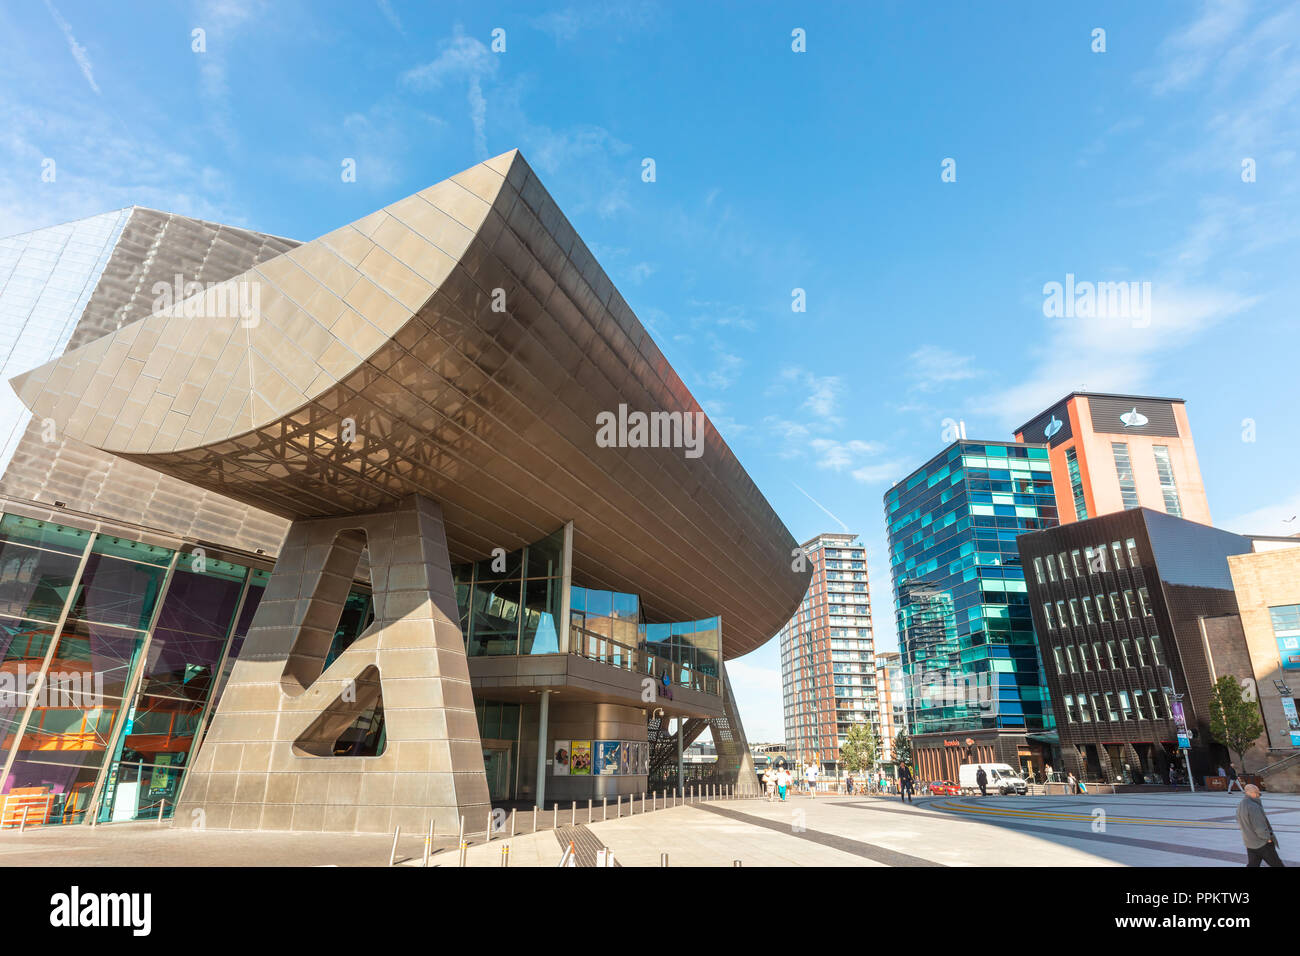 The Lowry at Salford Quays is the Greater Manchester's most visited tourist attraction. The complex was designed by Michael Wilford. Stock Photo